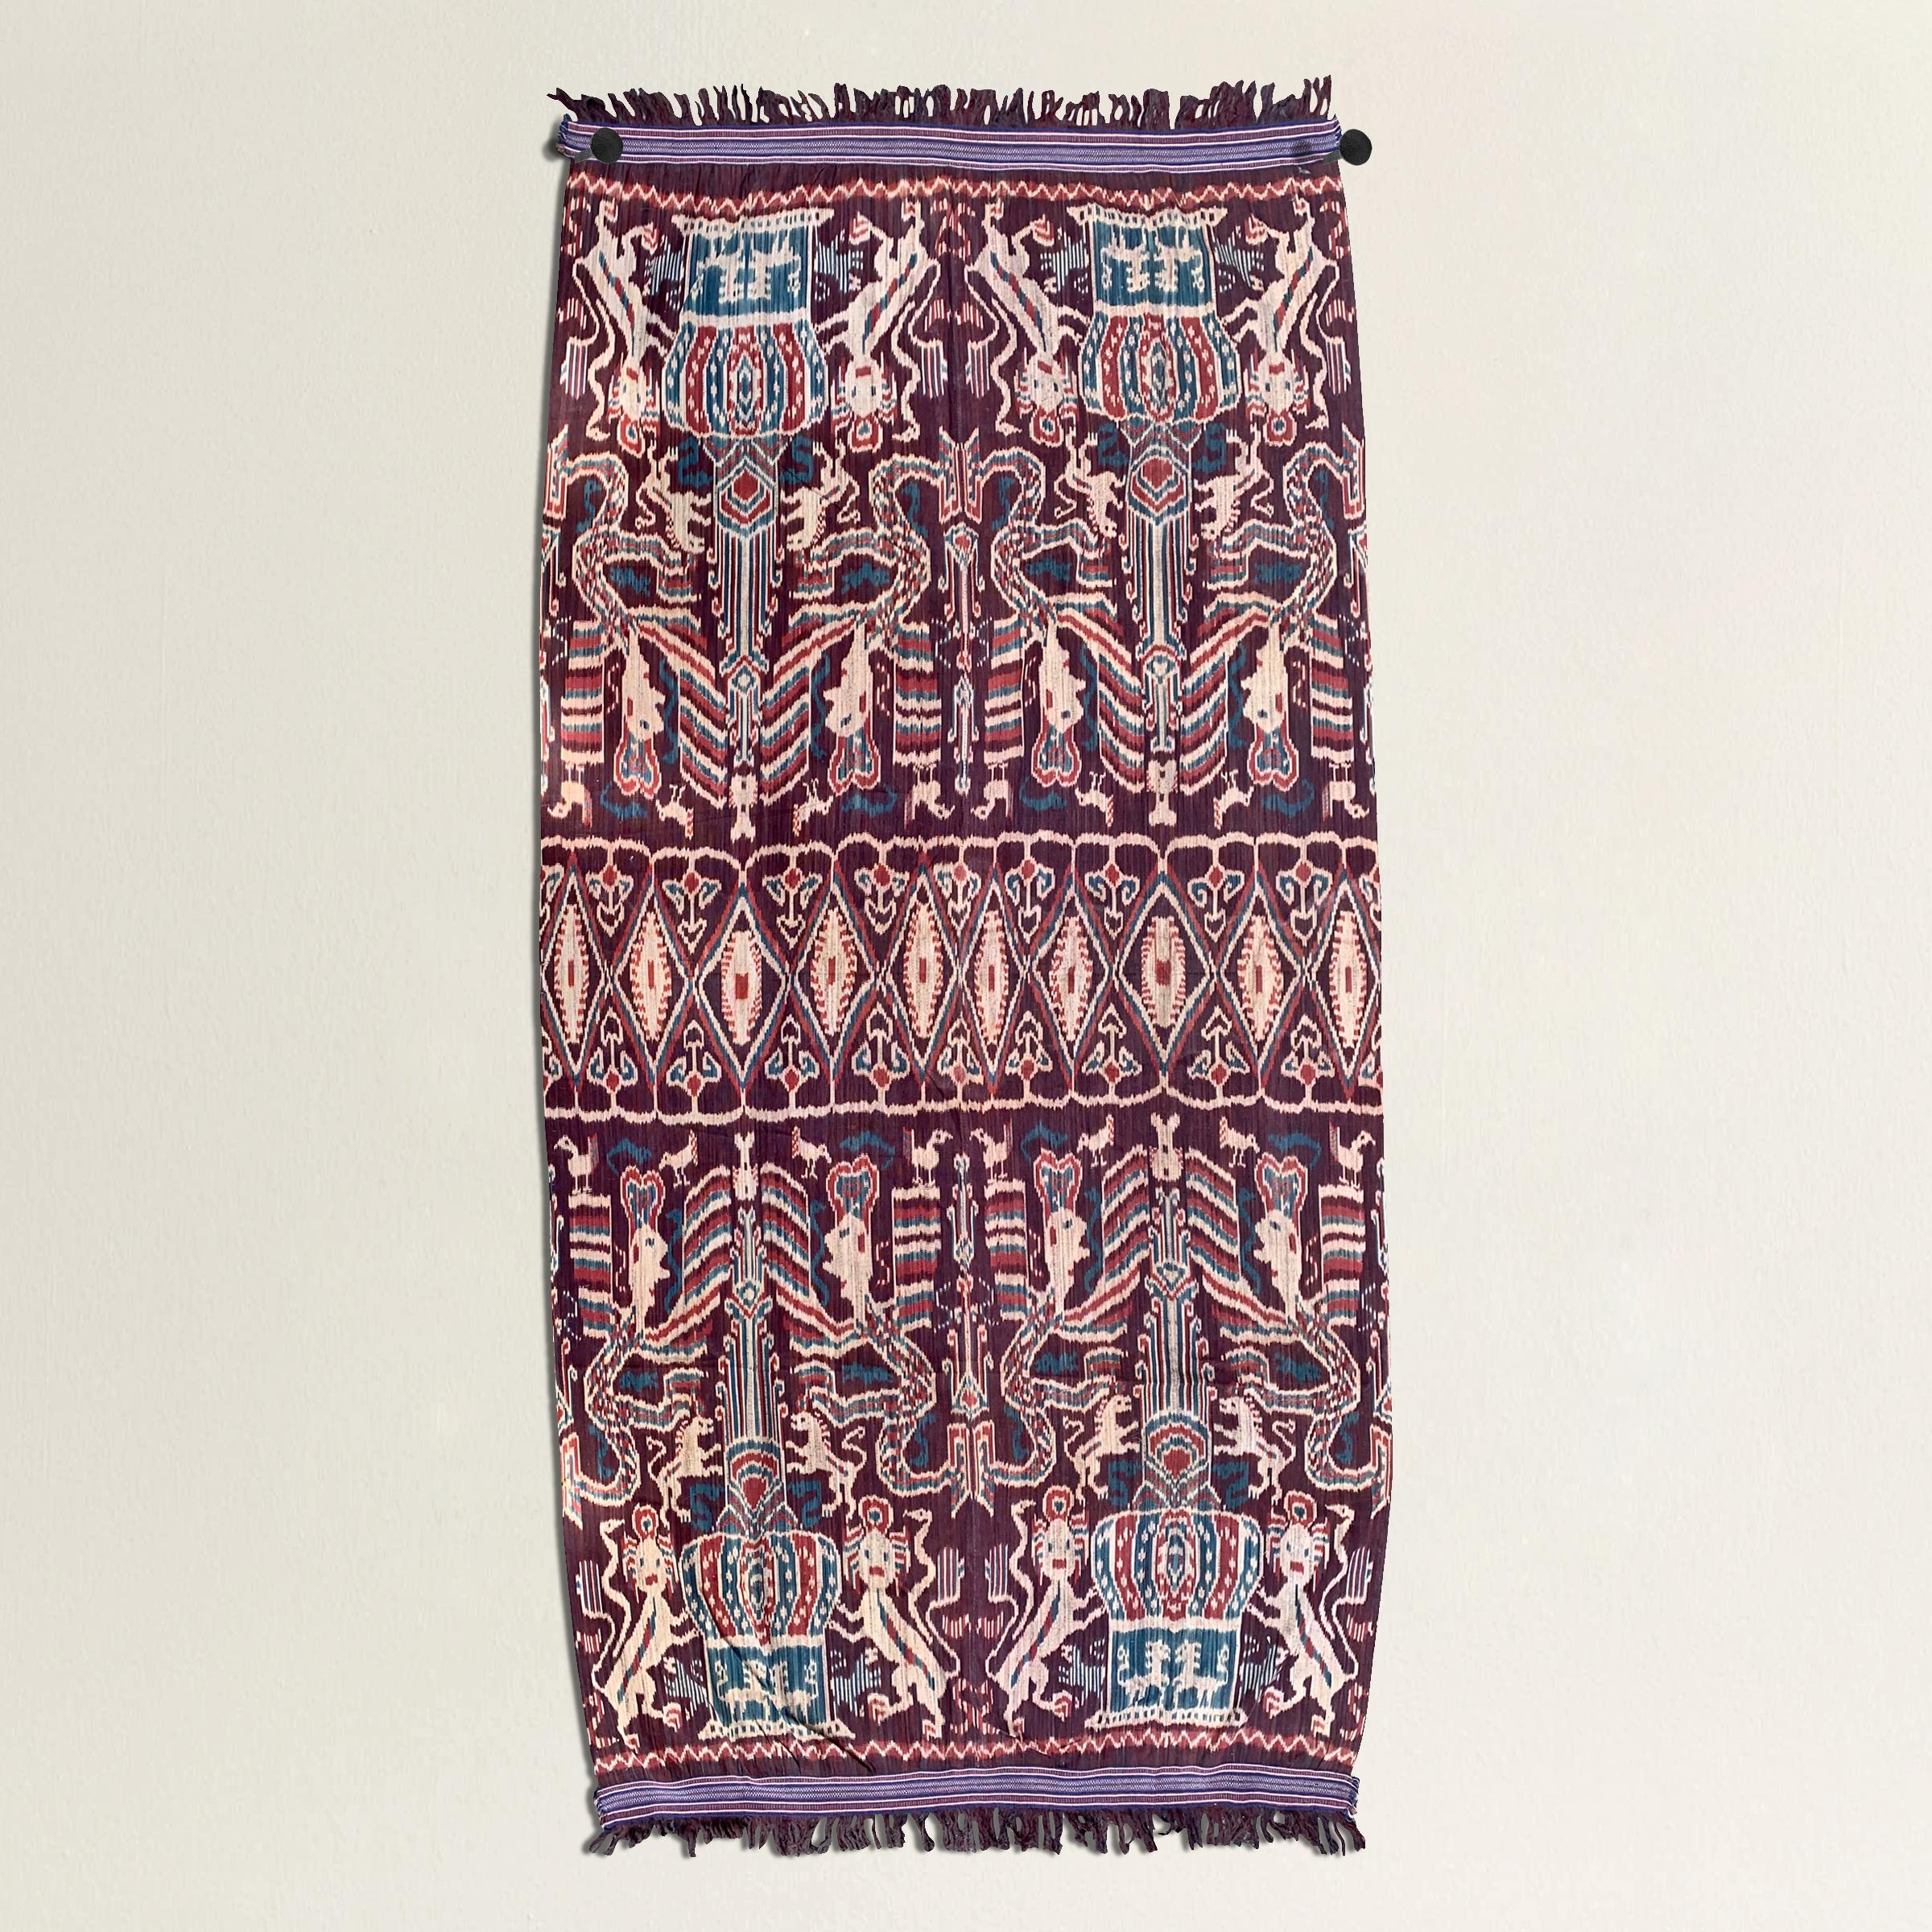 An incredible 20th century Indonesian hand-loomed ikat textile from the island of Sumba and depicting many lions, birds, and other mythological winged figures woven in beautiful vegetable dyed cotton. Textiles like these were historically worn by